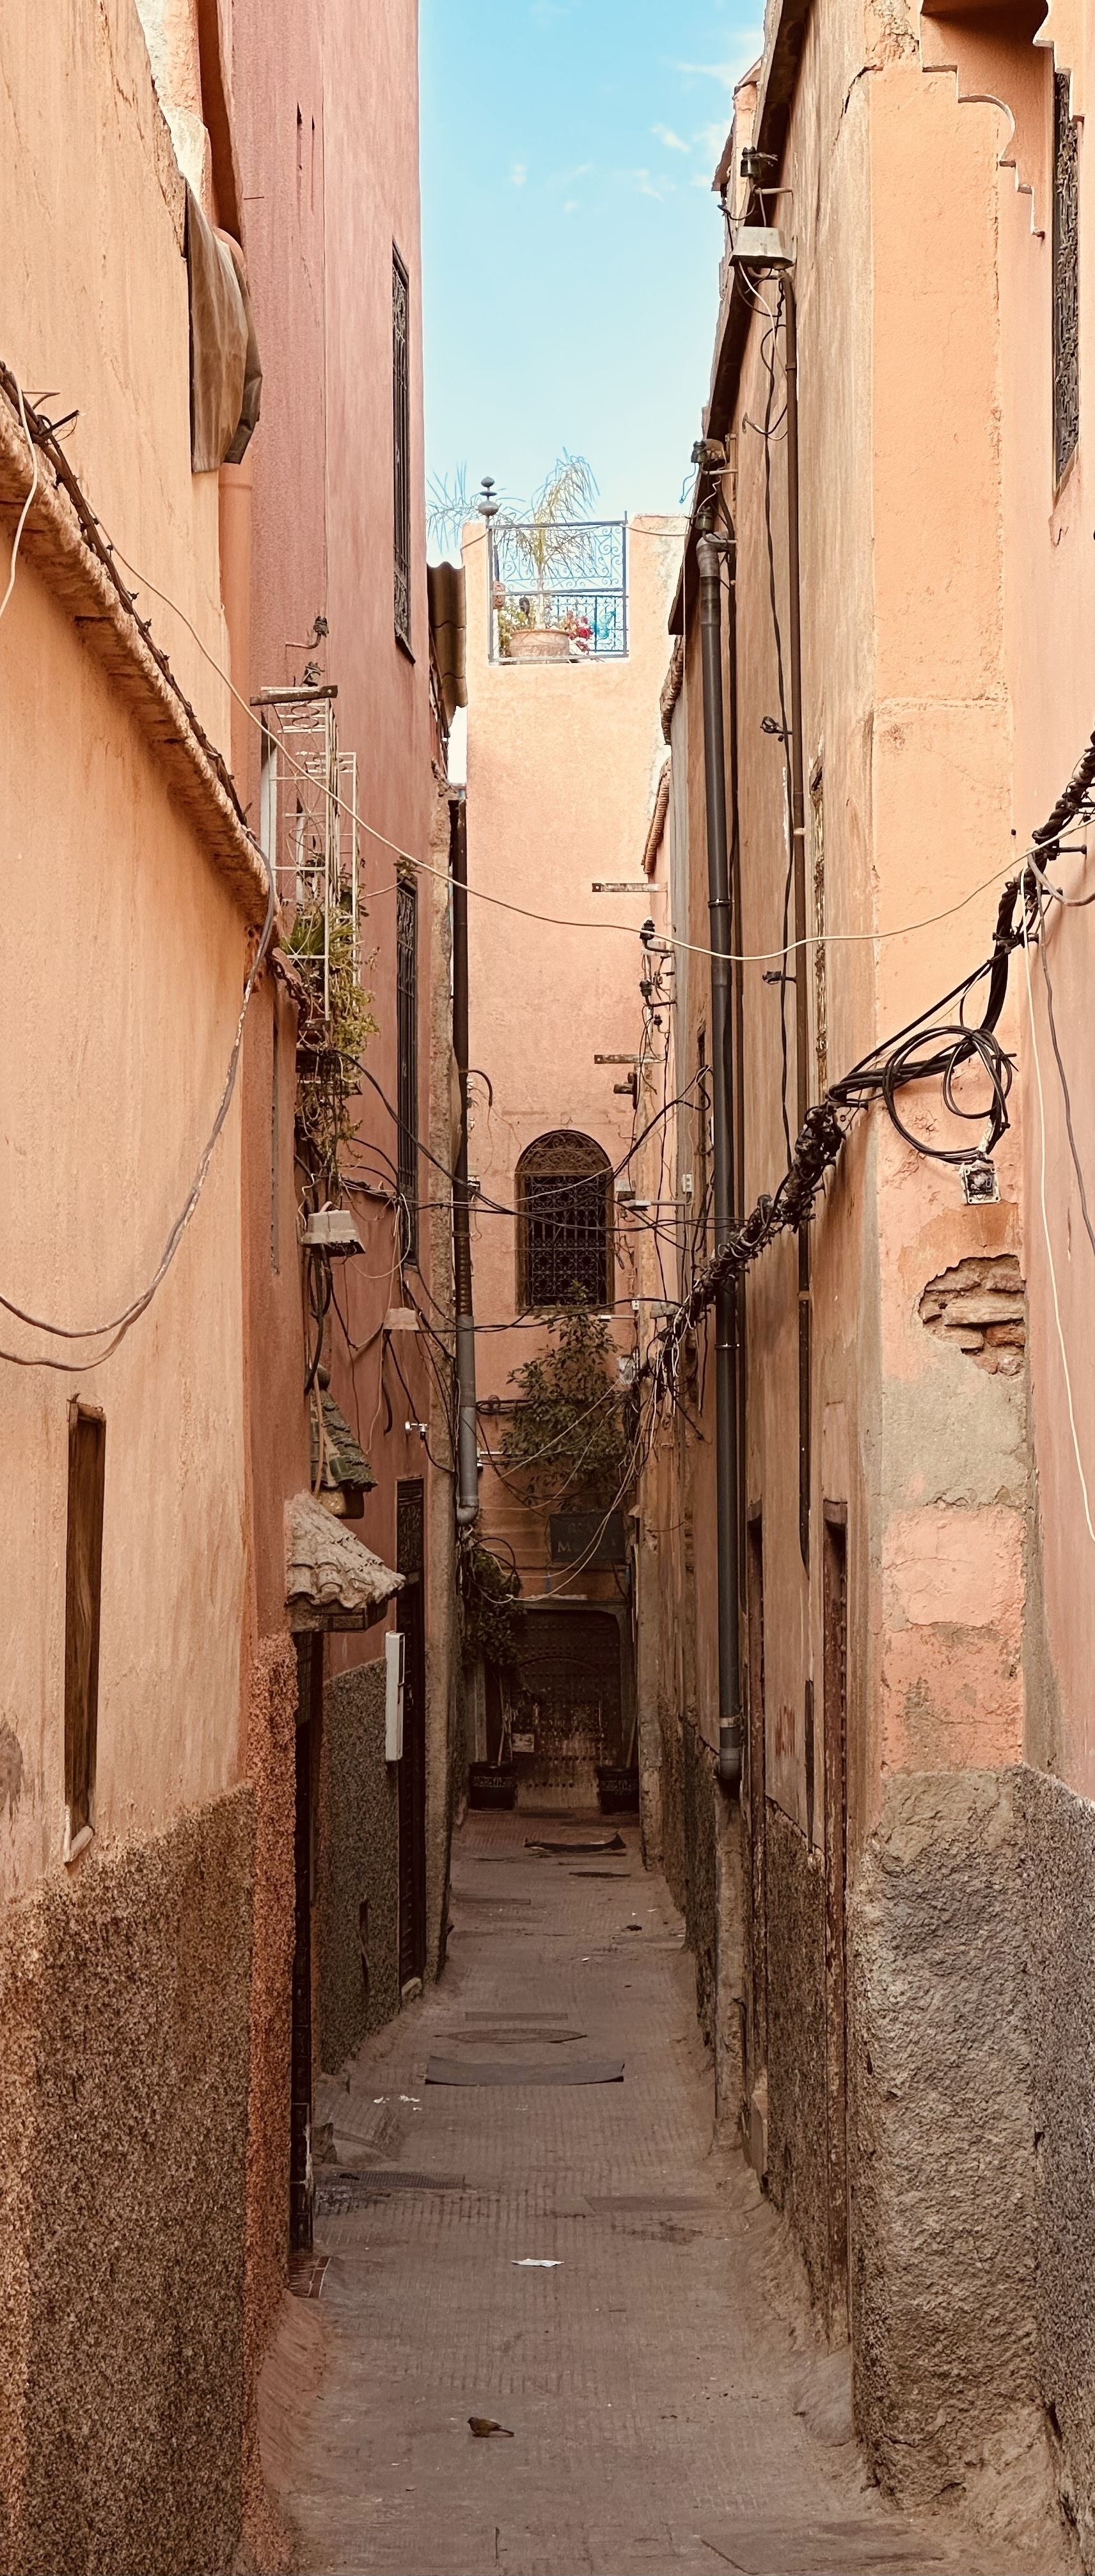 Looking down a narrow alley in Marrakesh.